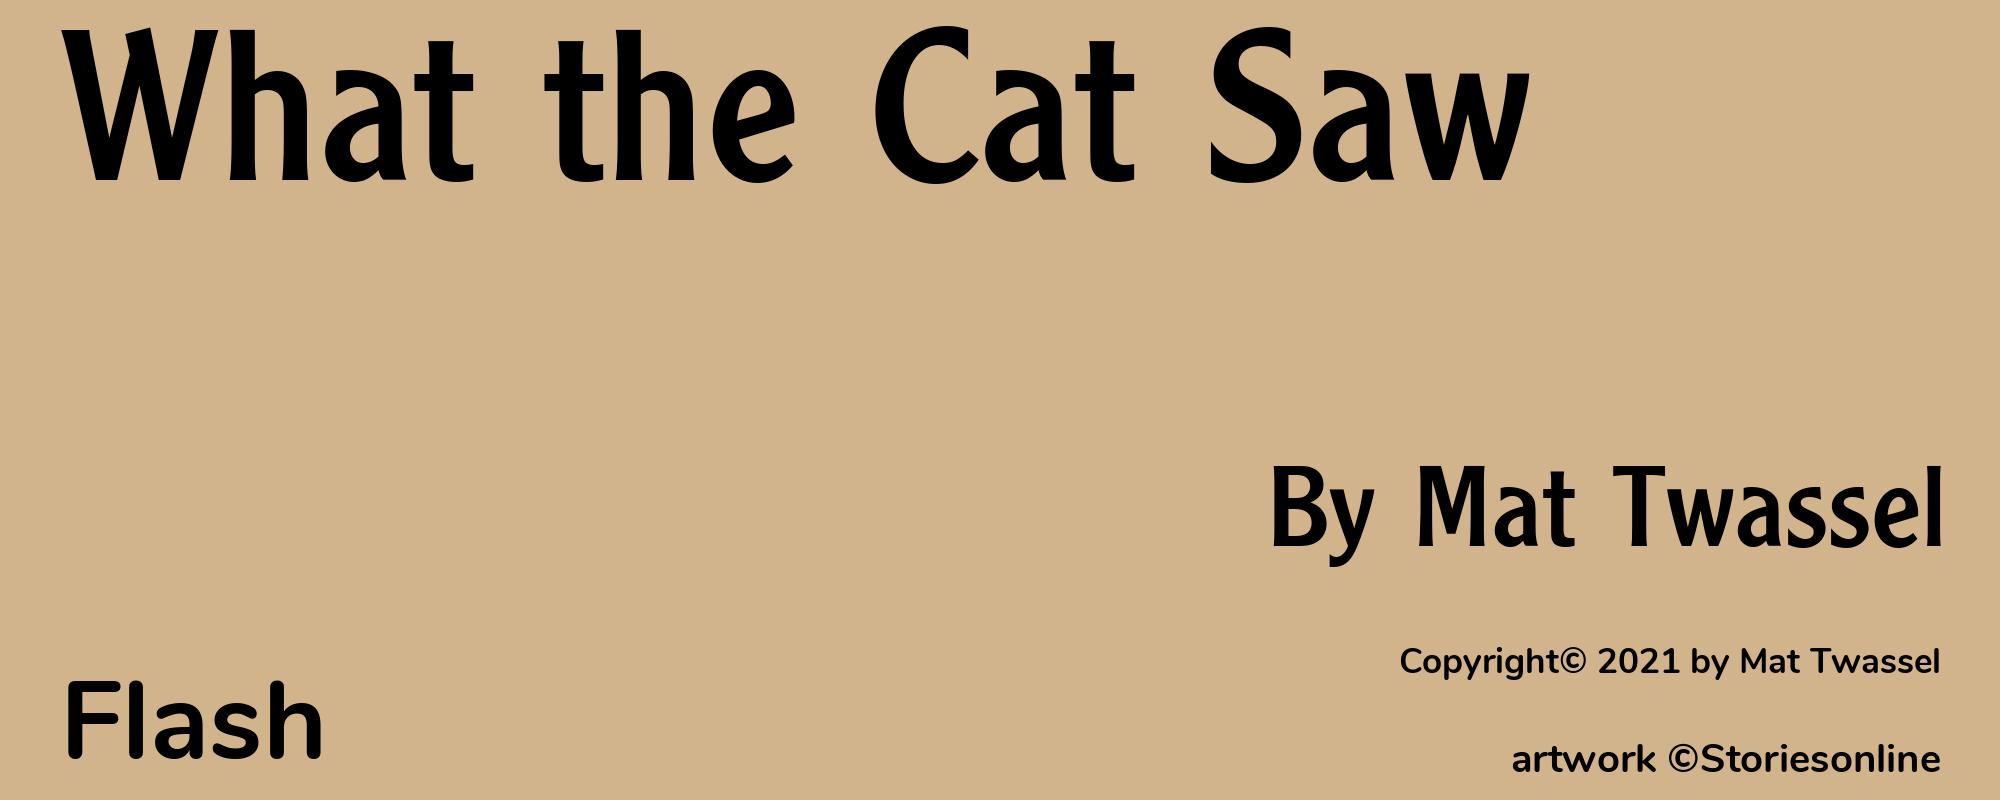 What the Cat Saw - Cover